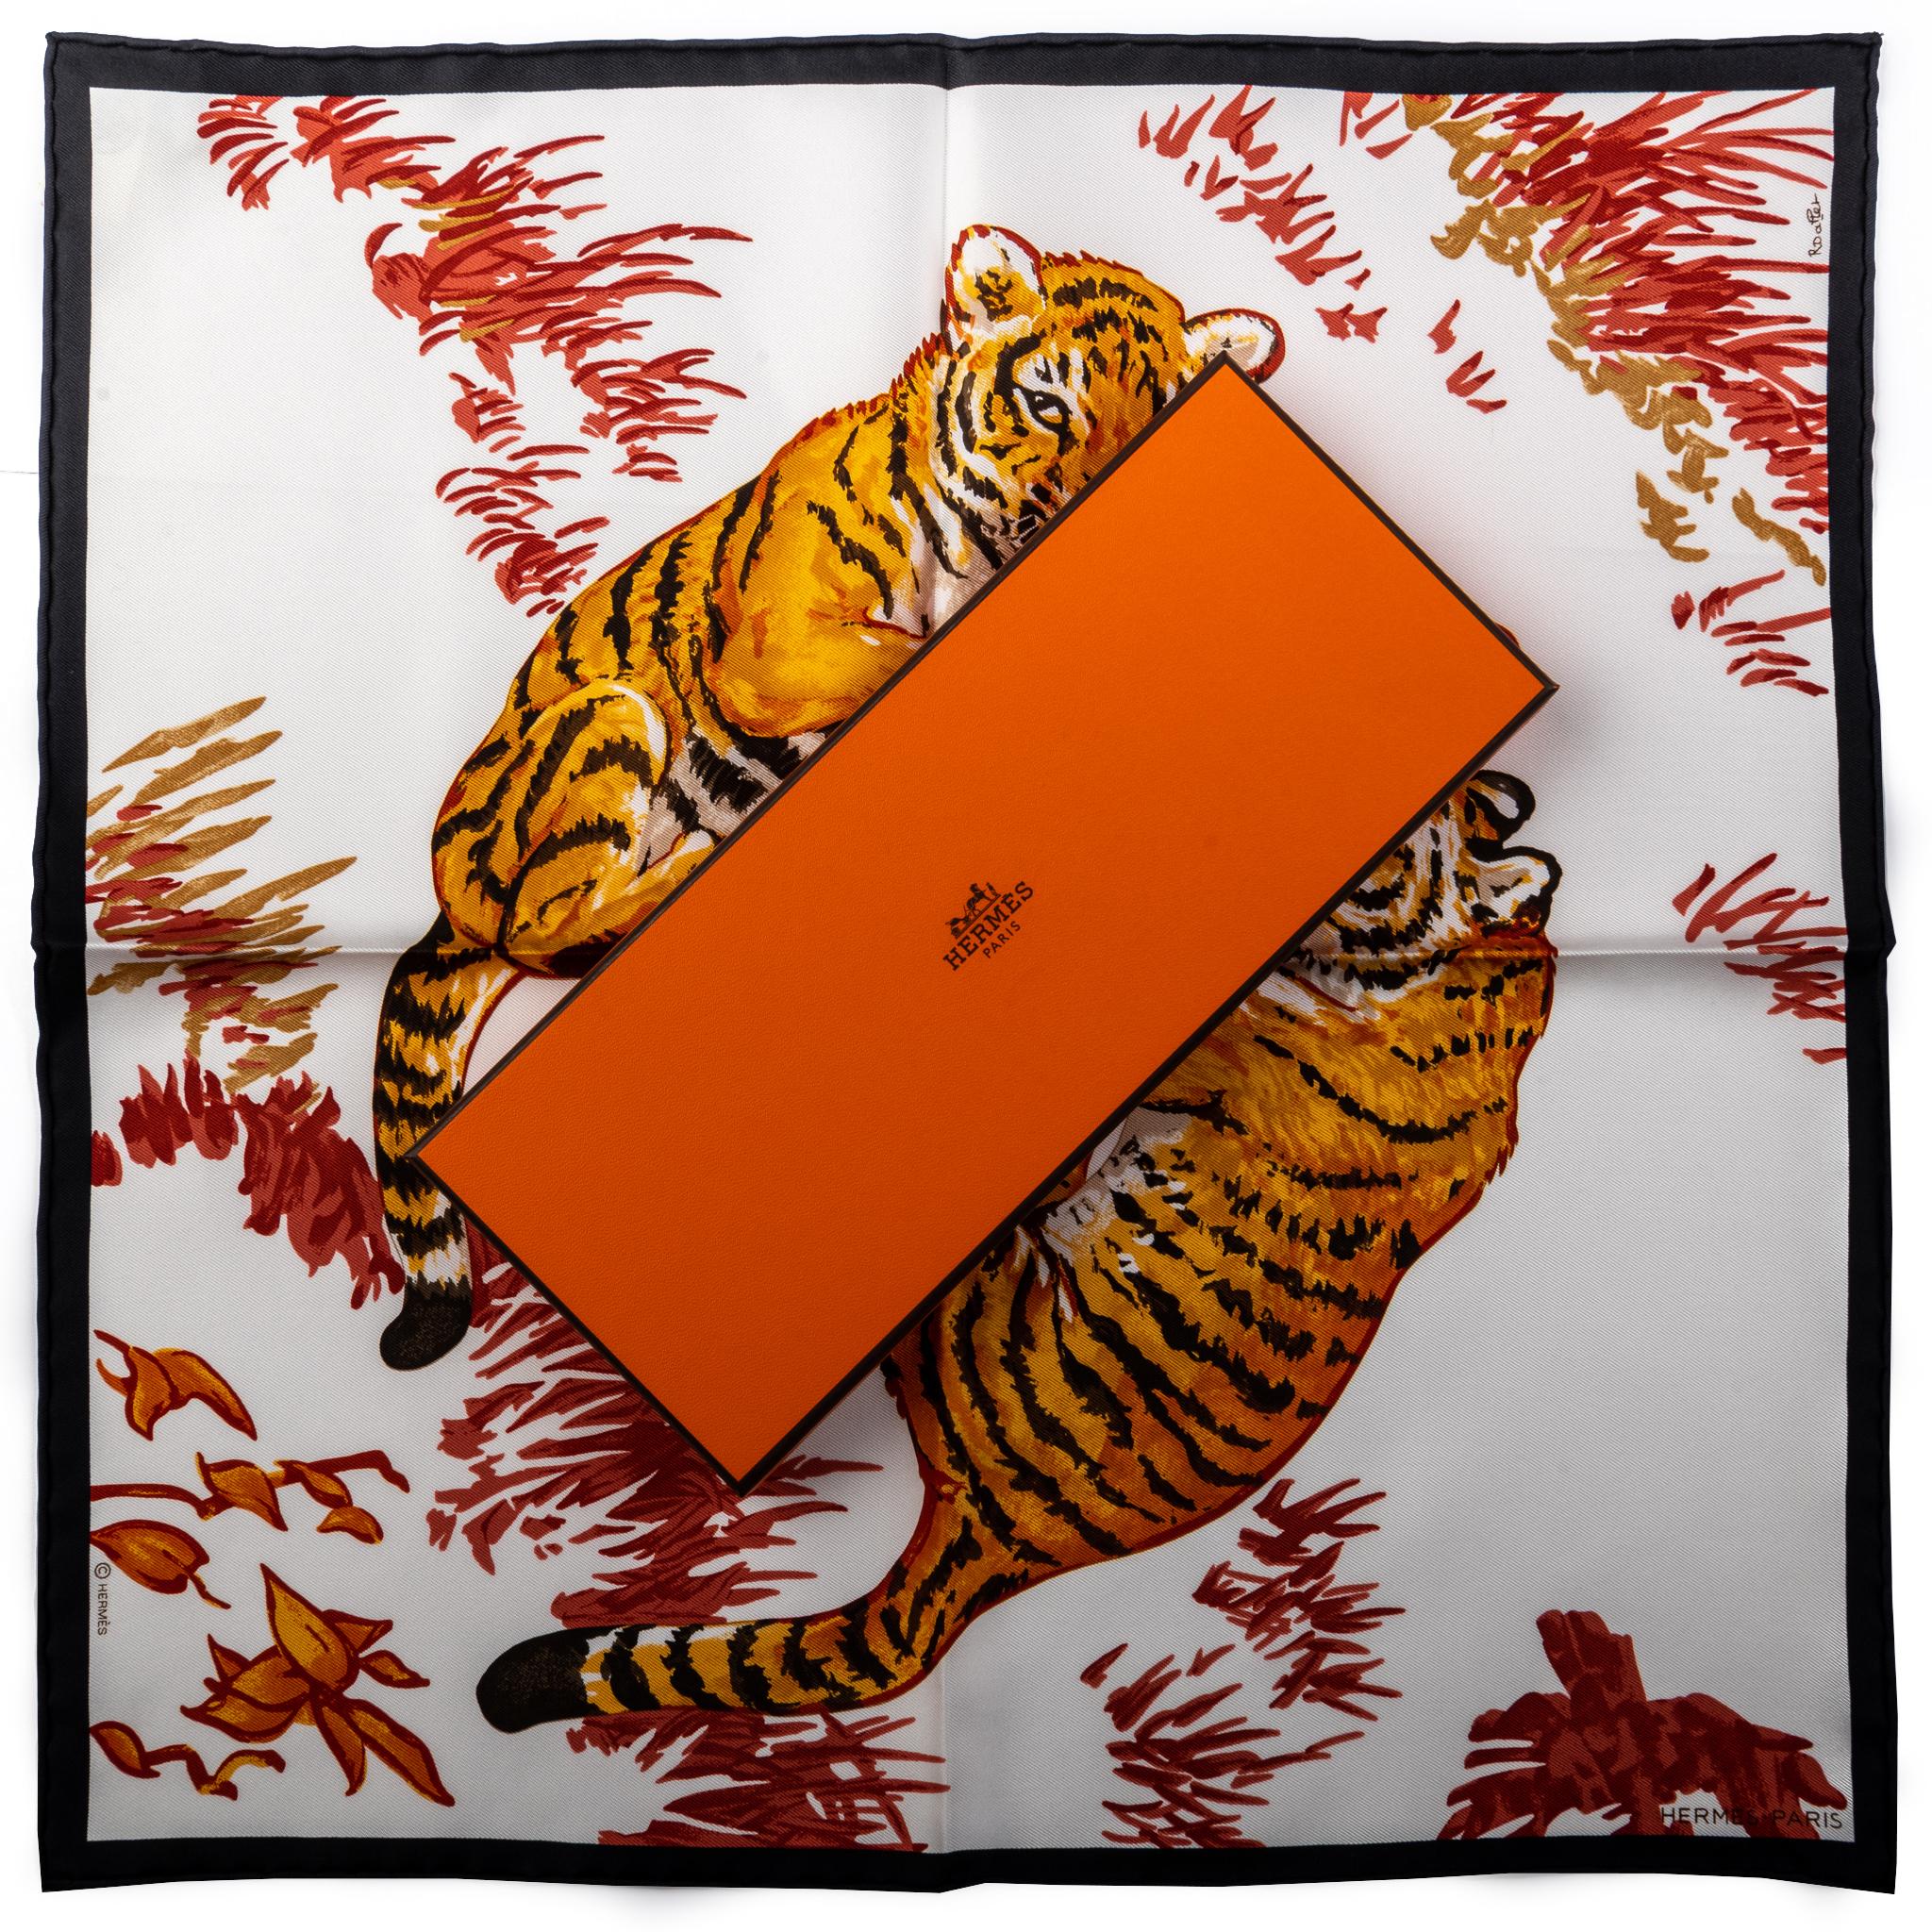 Hermes collectible silk tiger cubs gavroche small scarf in black, white and red. Hand rolled edges. New in box.